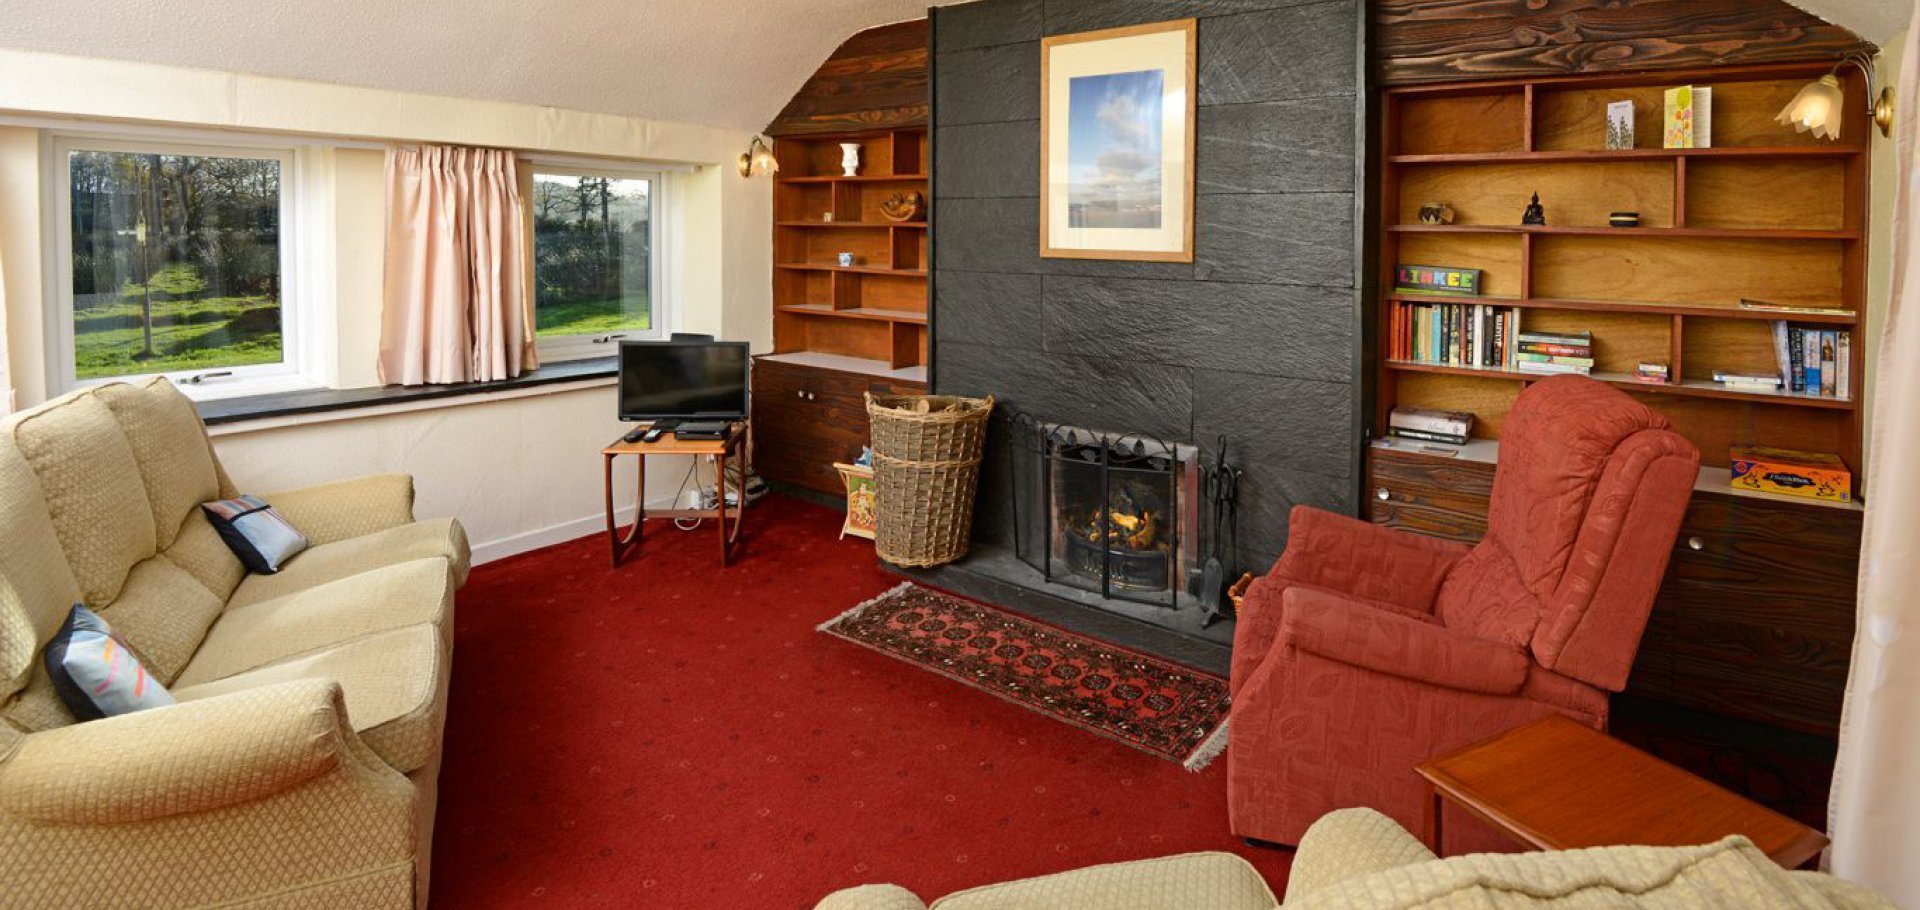 Woodsedge self catering cottage in Dumfries and Galloway features an open fire